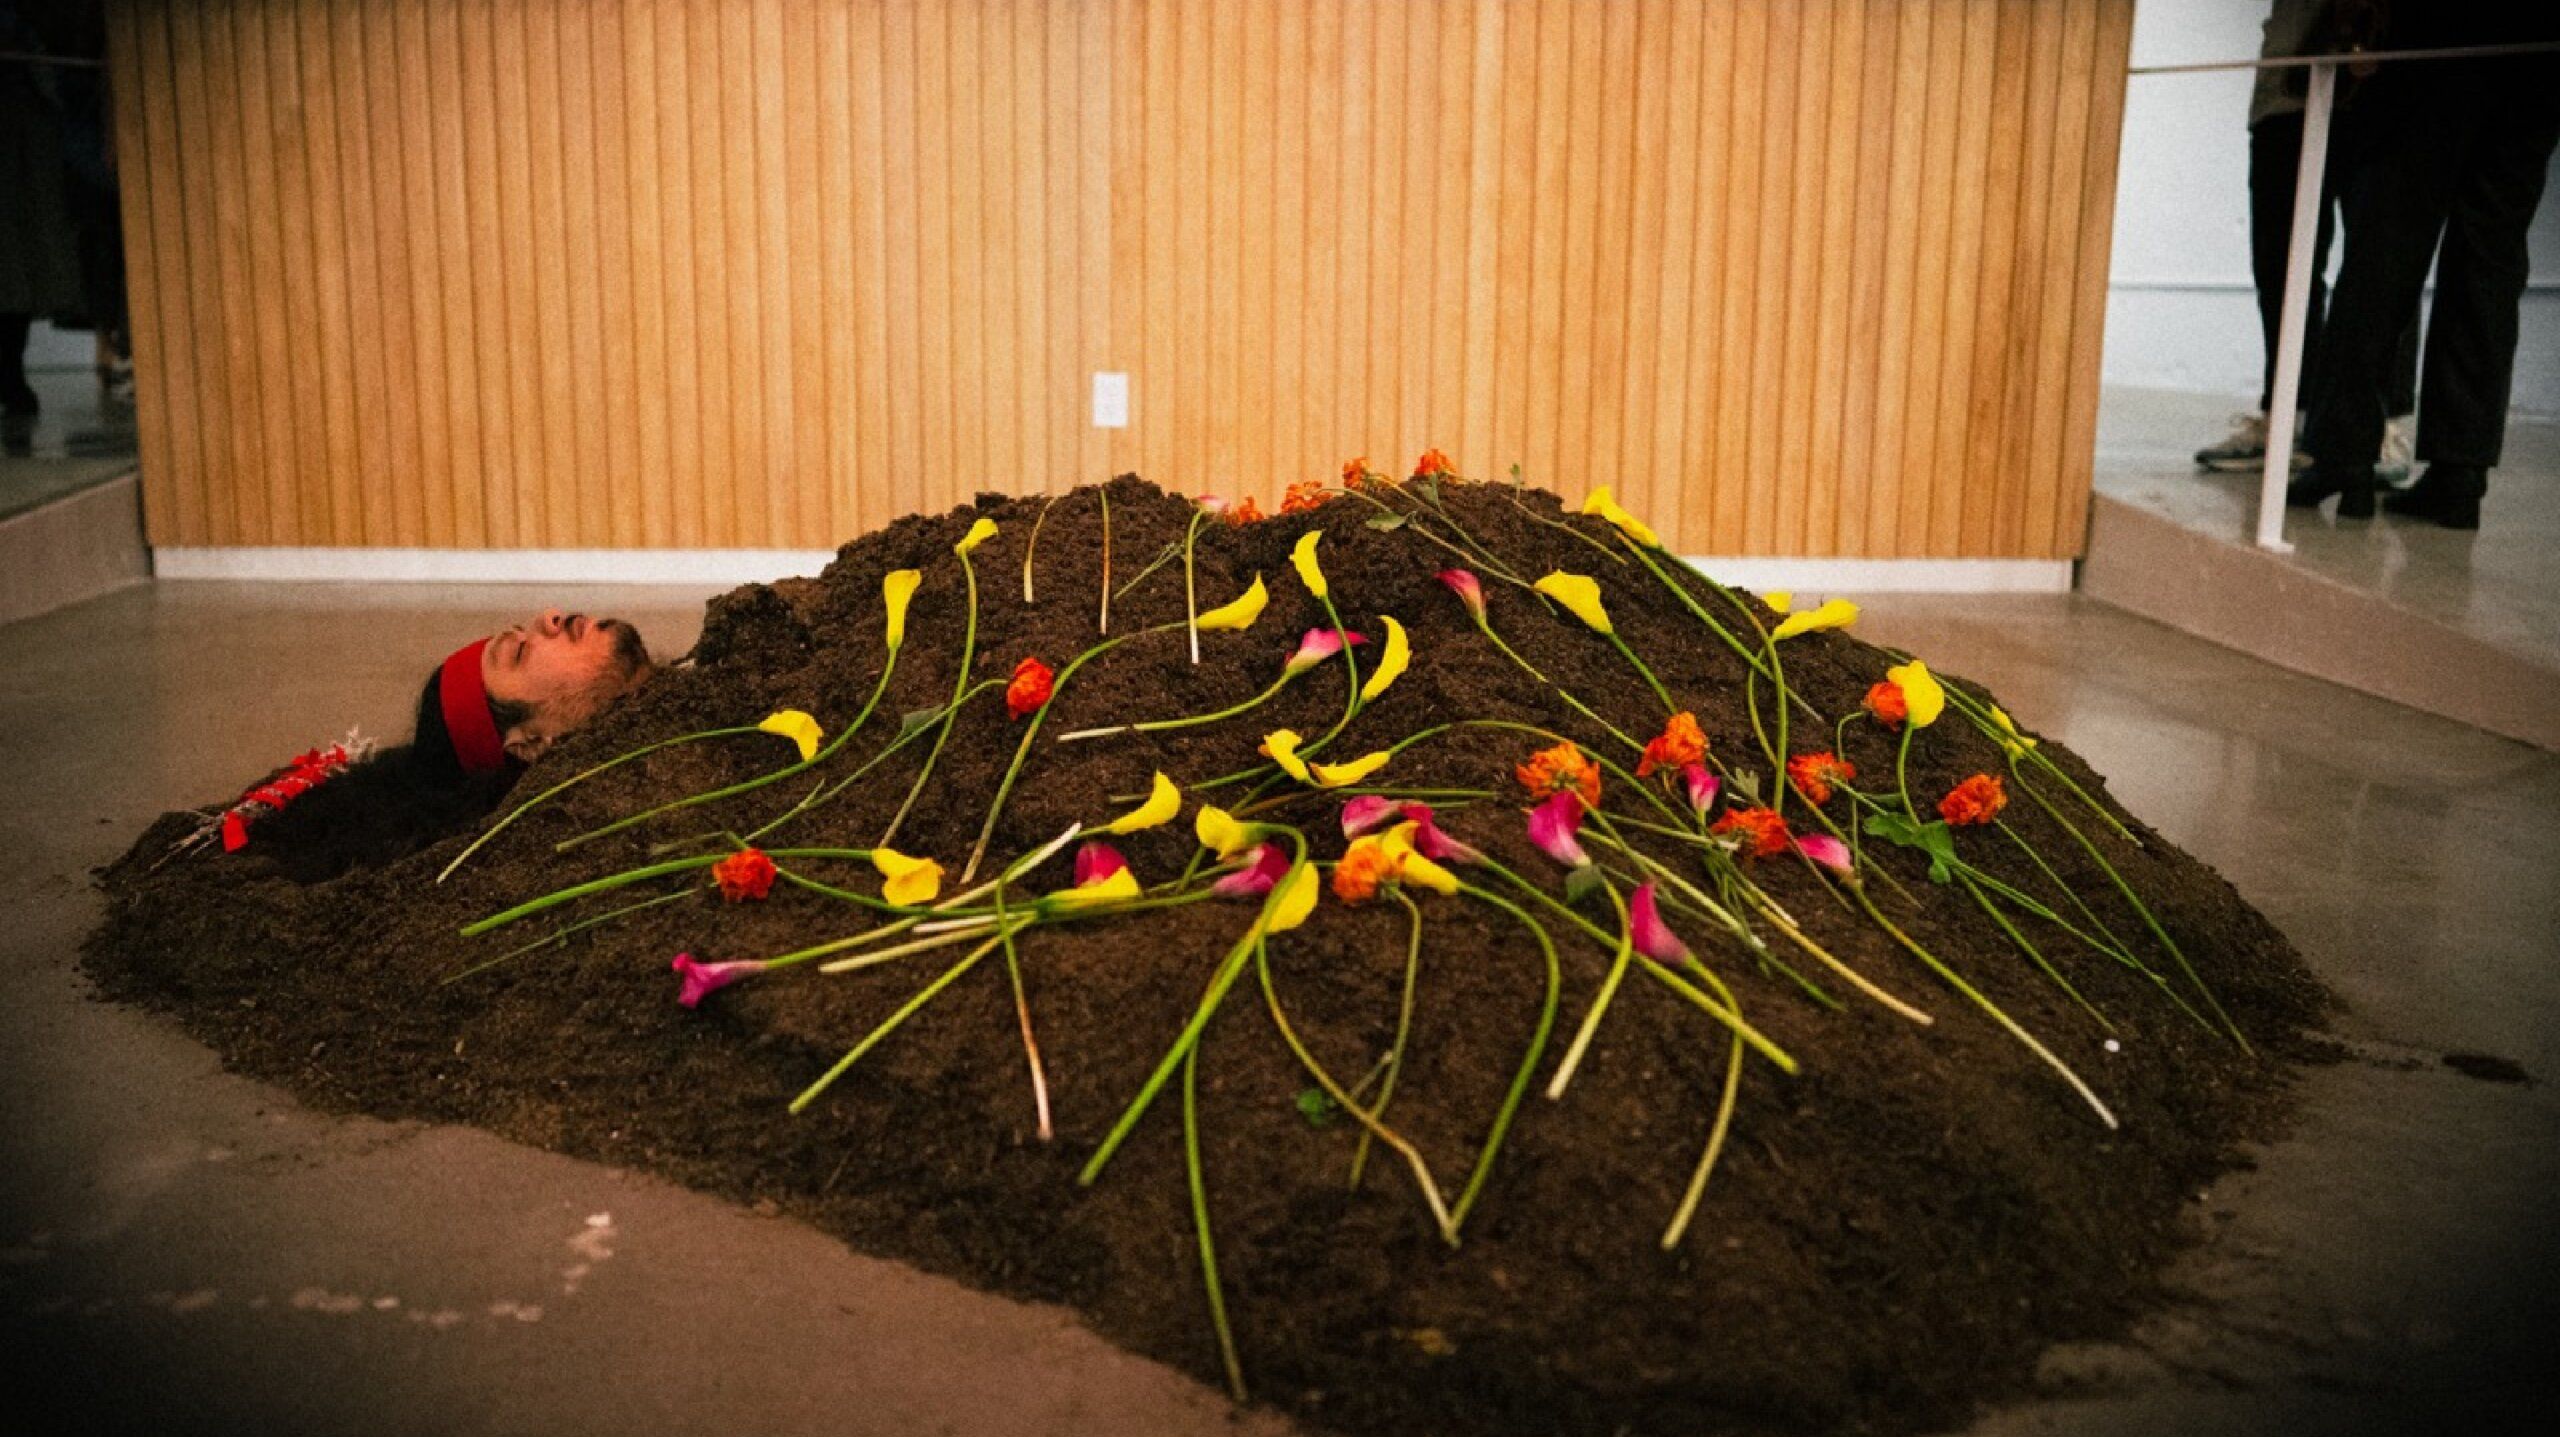 Josue buried during exhibit with flowers over the dirt